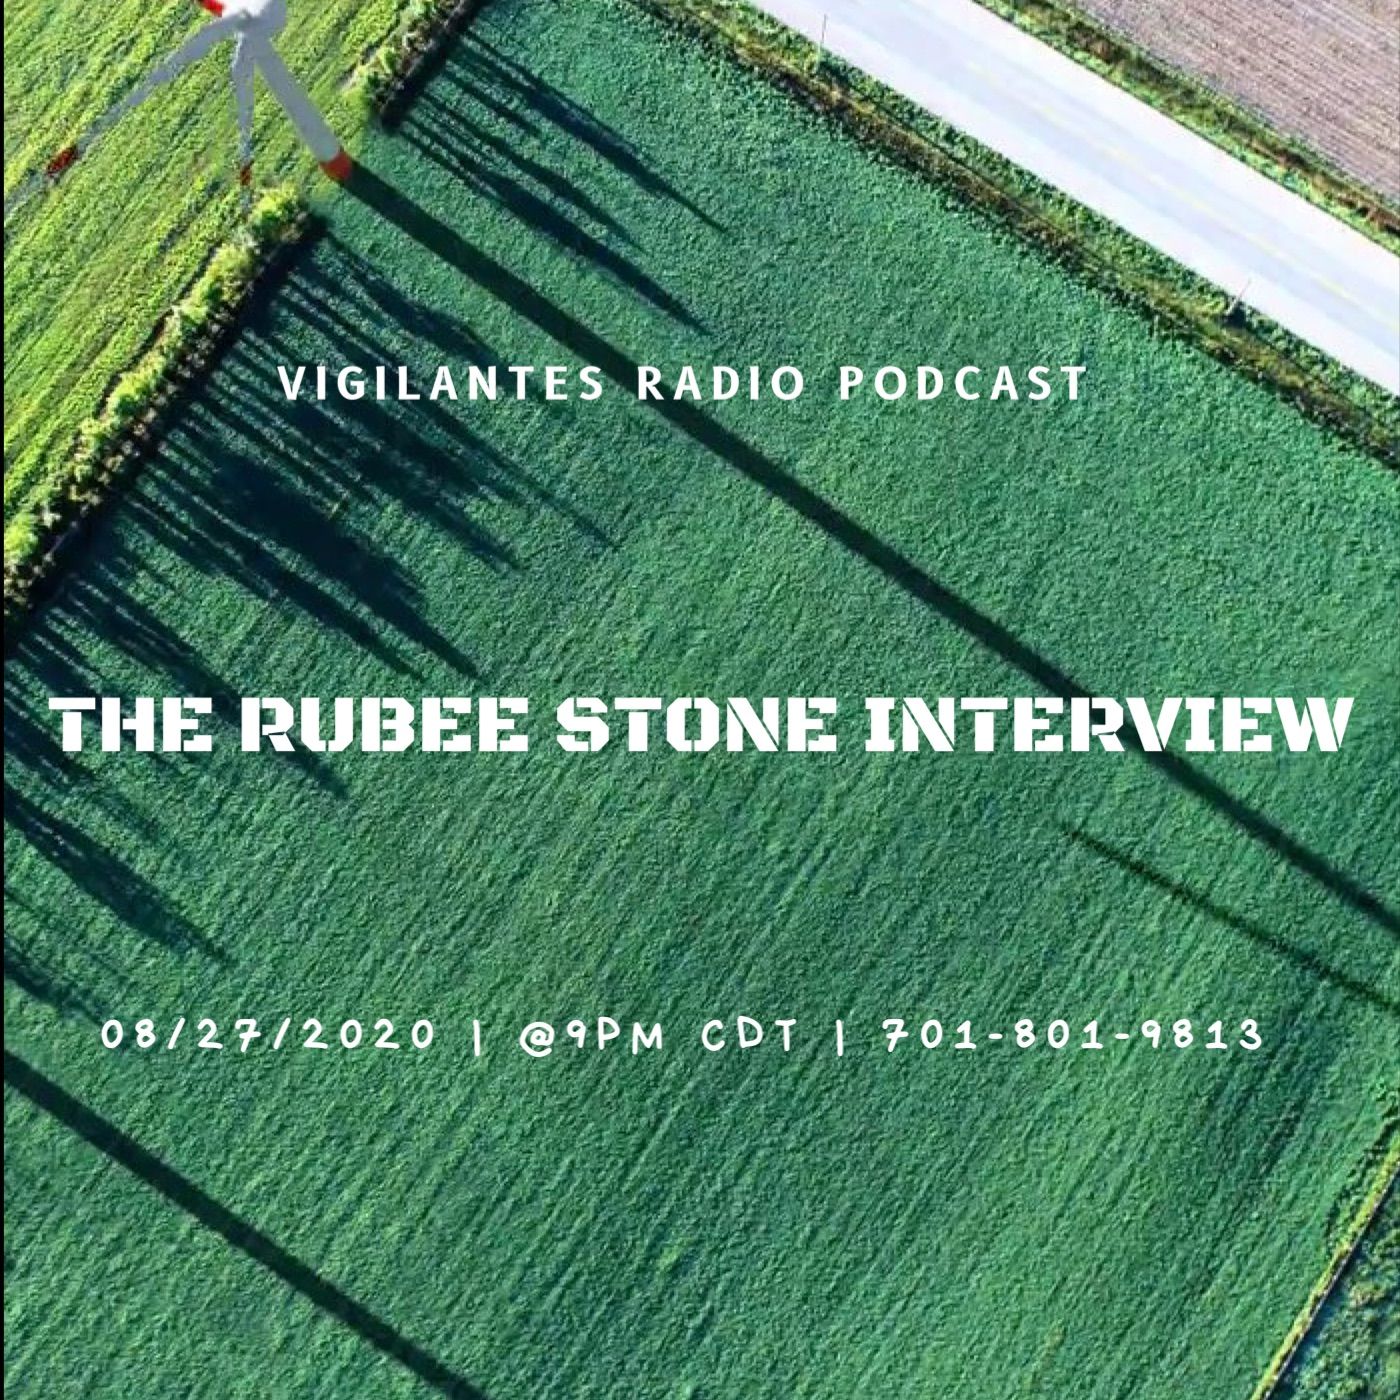 The Rubee Stone Interview.